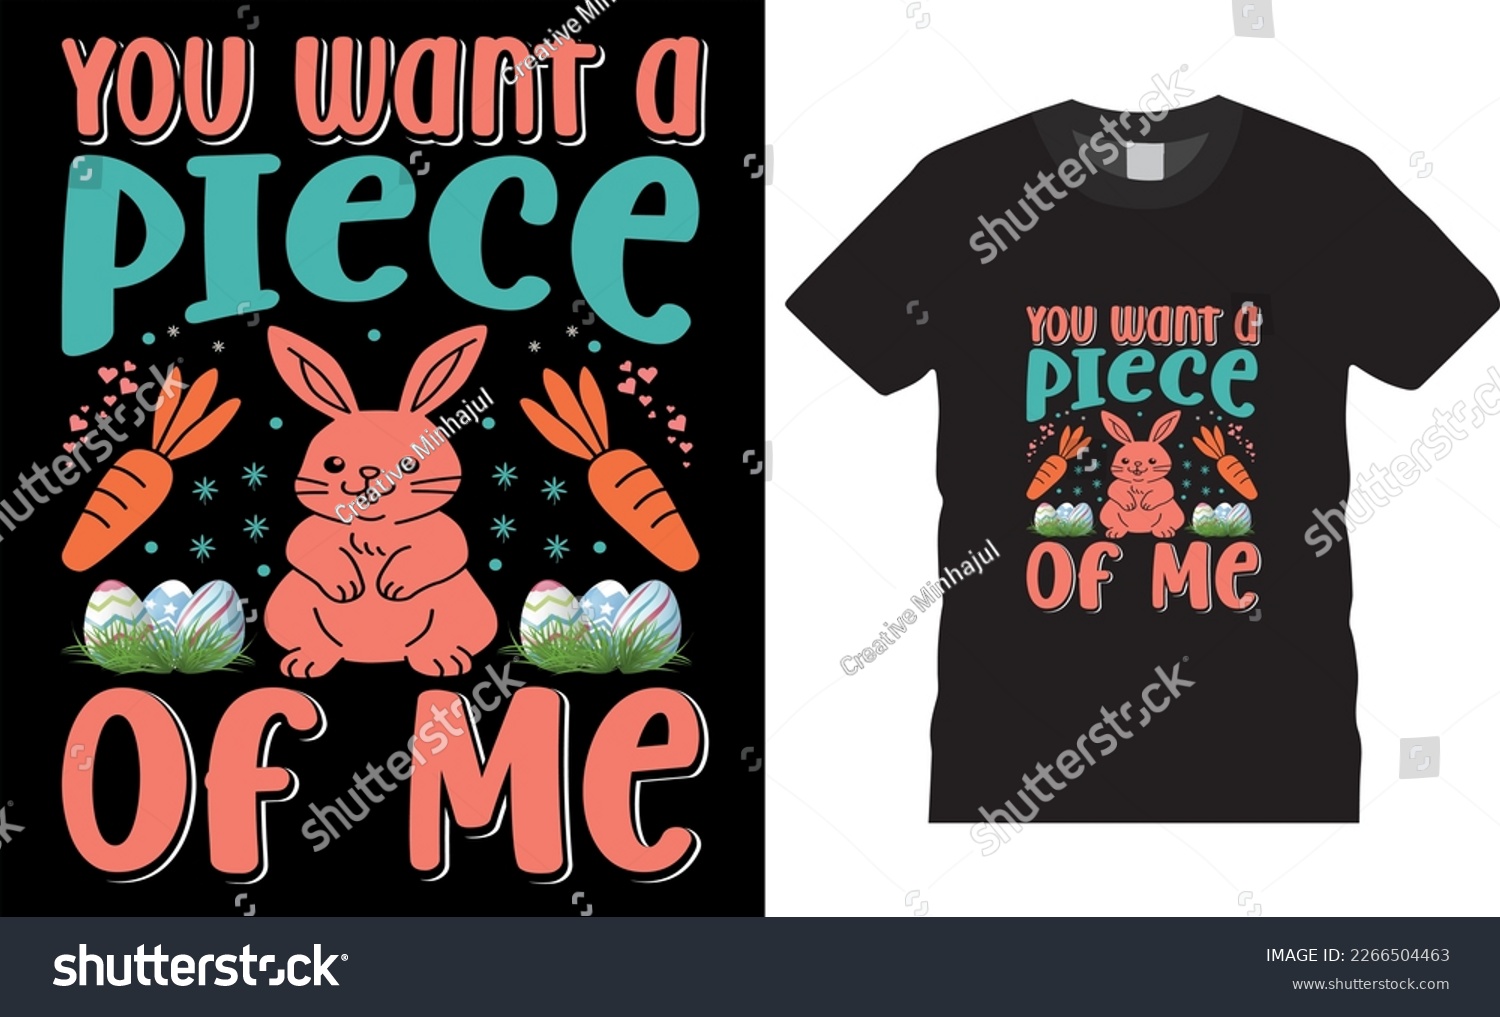 SVG of Happy easter rabbit, bunny tshirt vector design template.You want a piece of me day t-shirt design.Ready to print for apparel, poster, mug and greeting plate illustration. svg